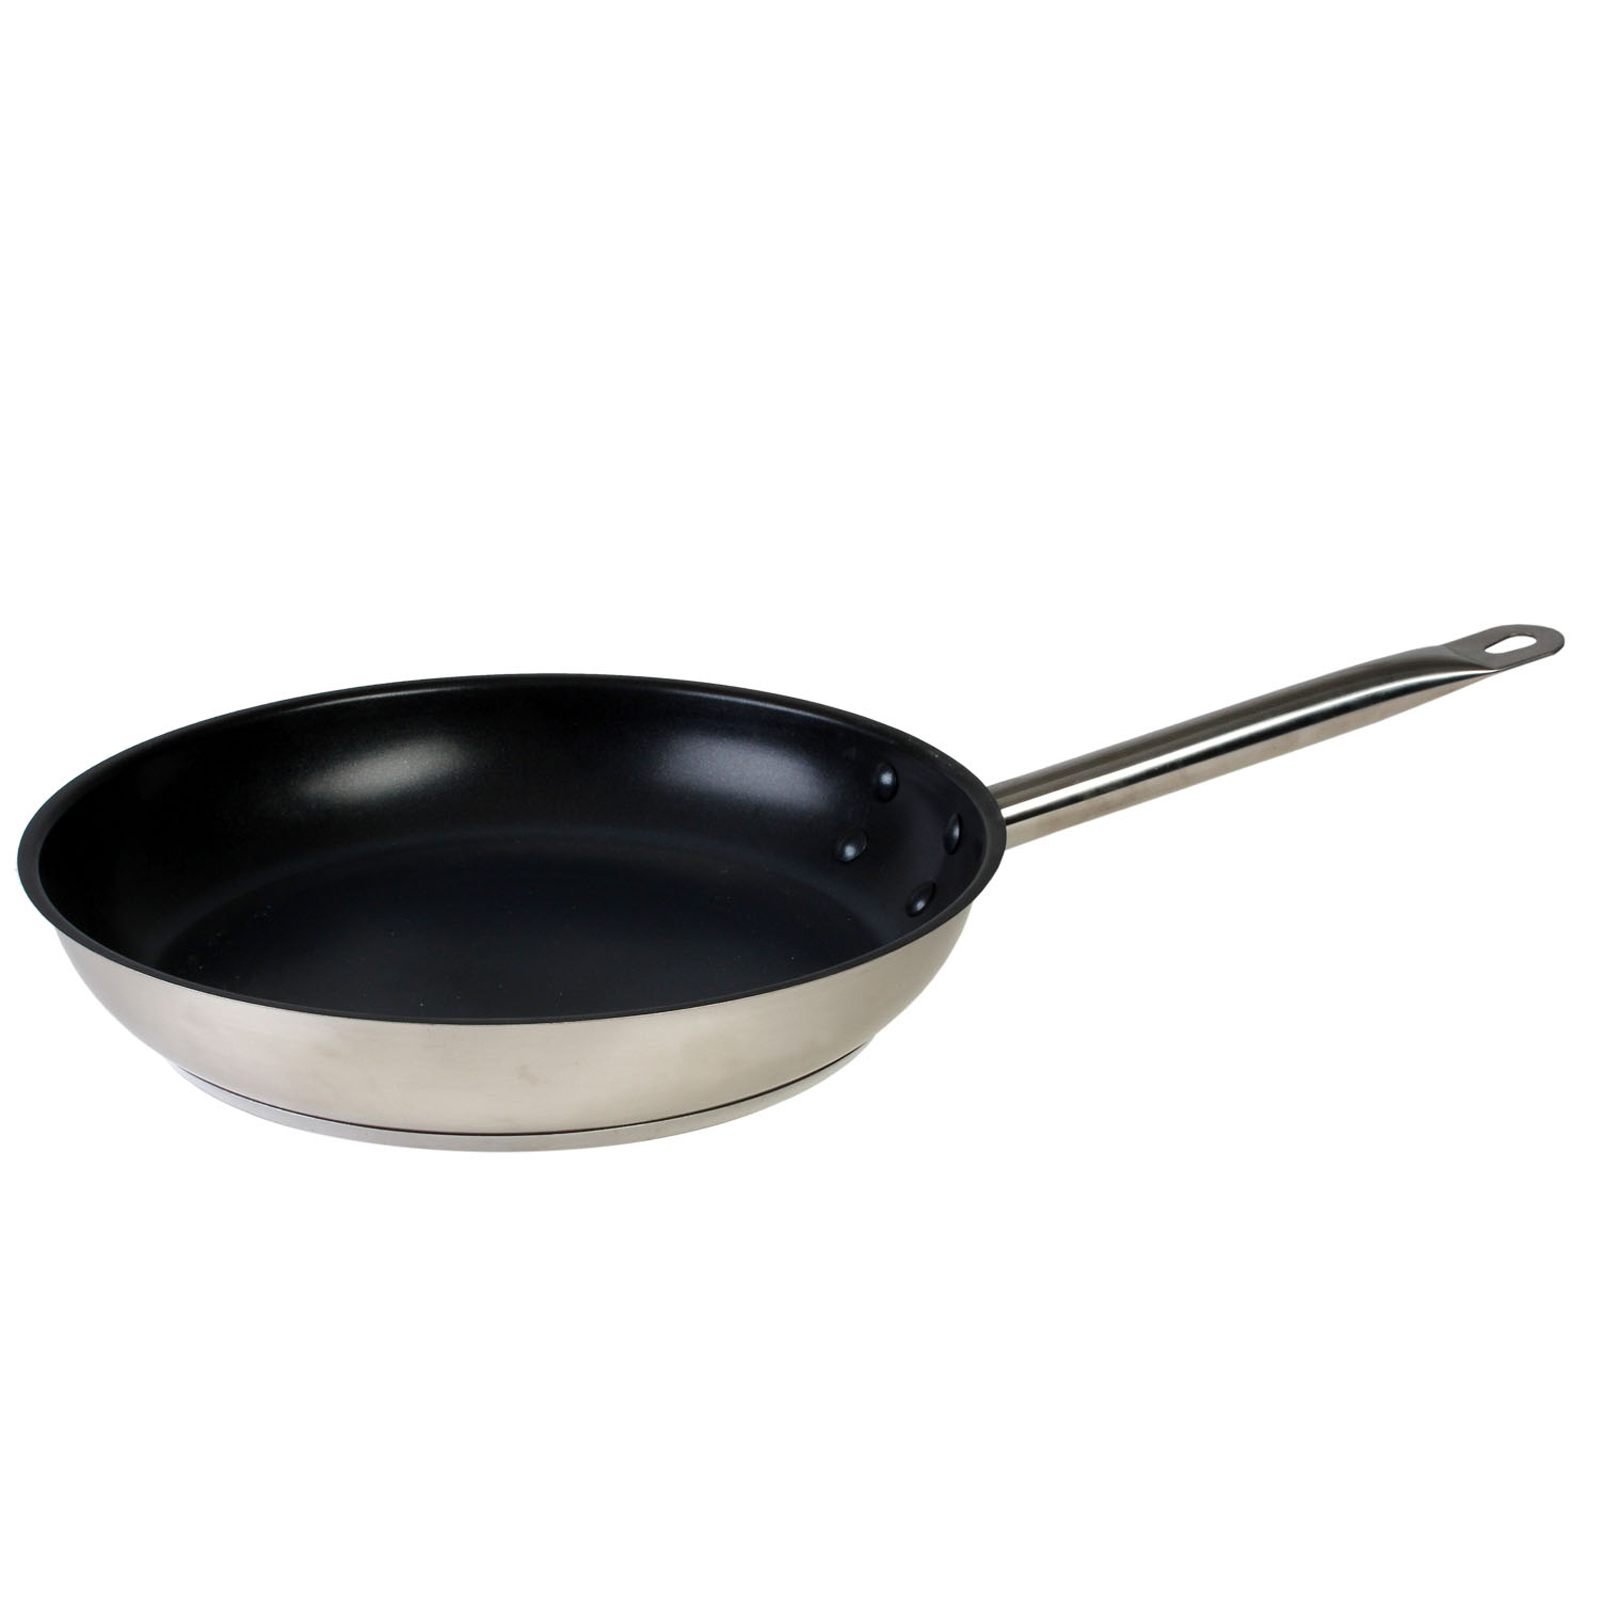 11" 18/8 Stainless Steel Fry Pan Quantum ll Non-stick